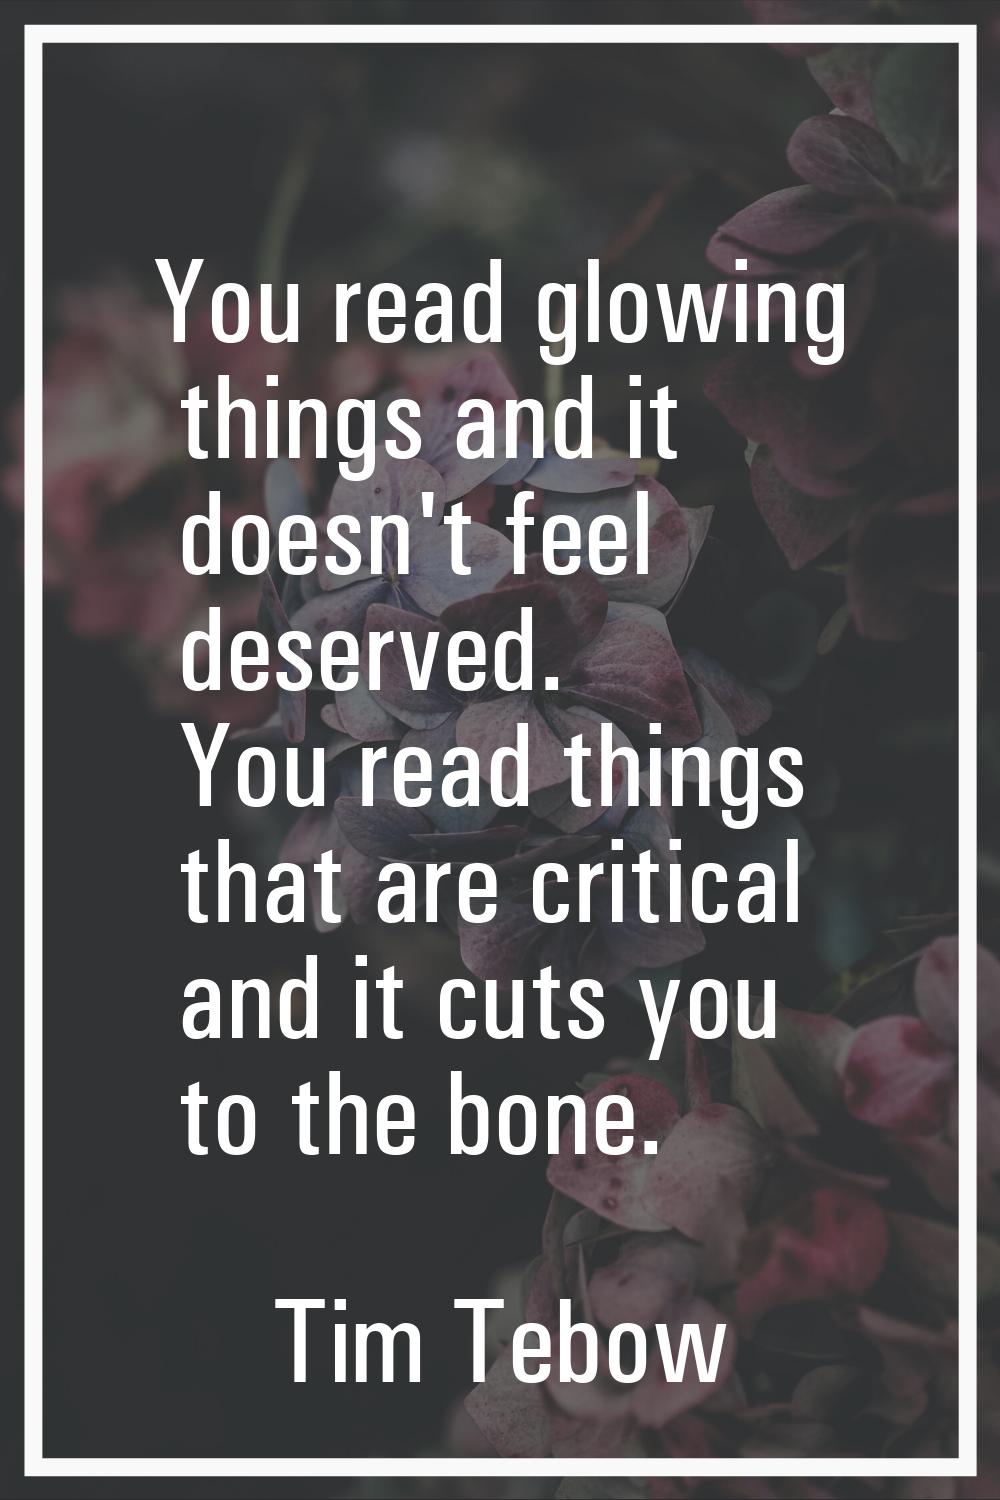 You read glowing things and it doesn't feel deserved. You read things that are critical and it cuts